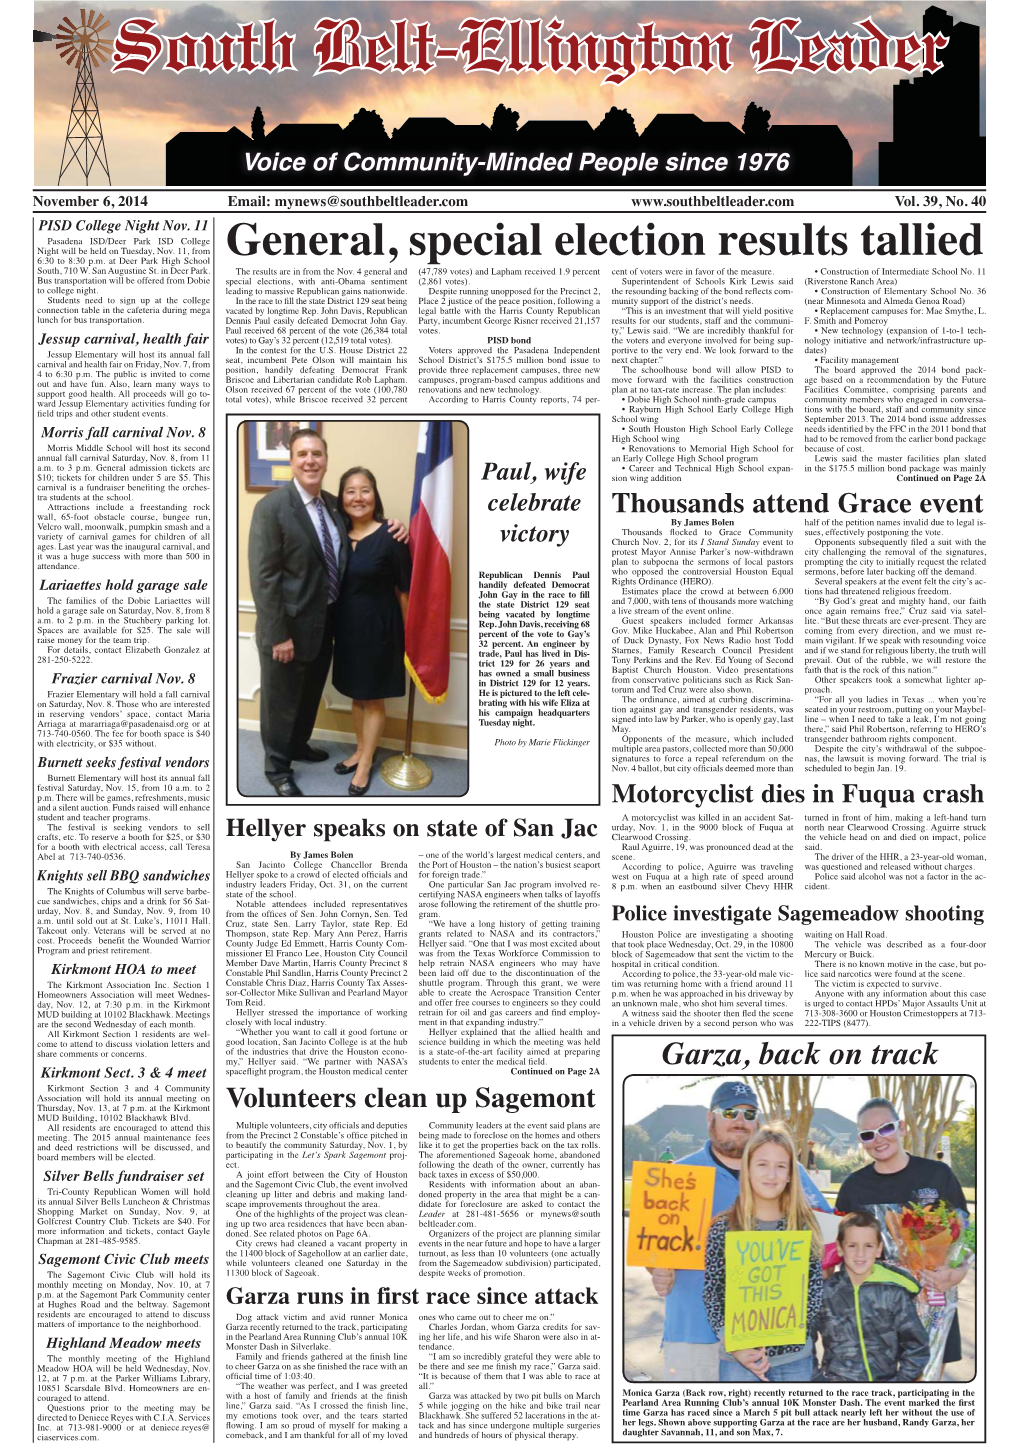 General, Special Election Results Tallied South, 710 W